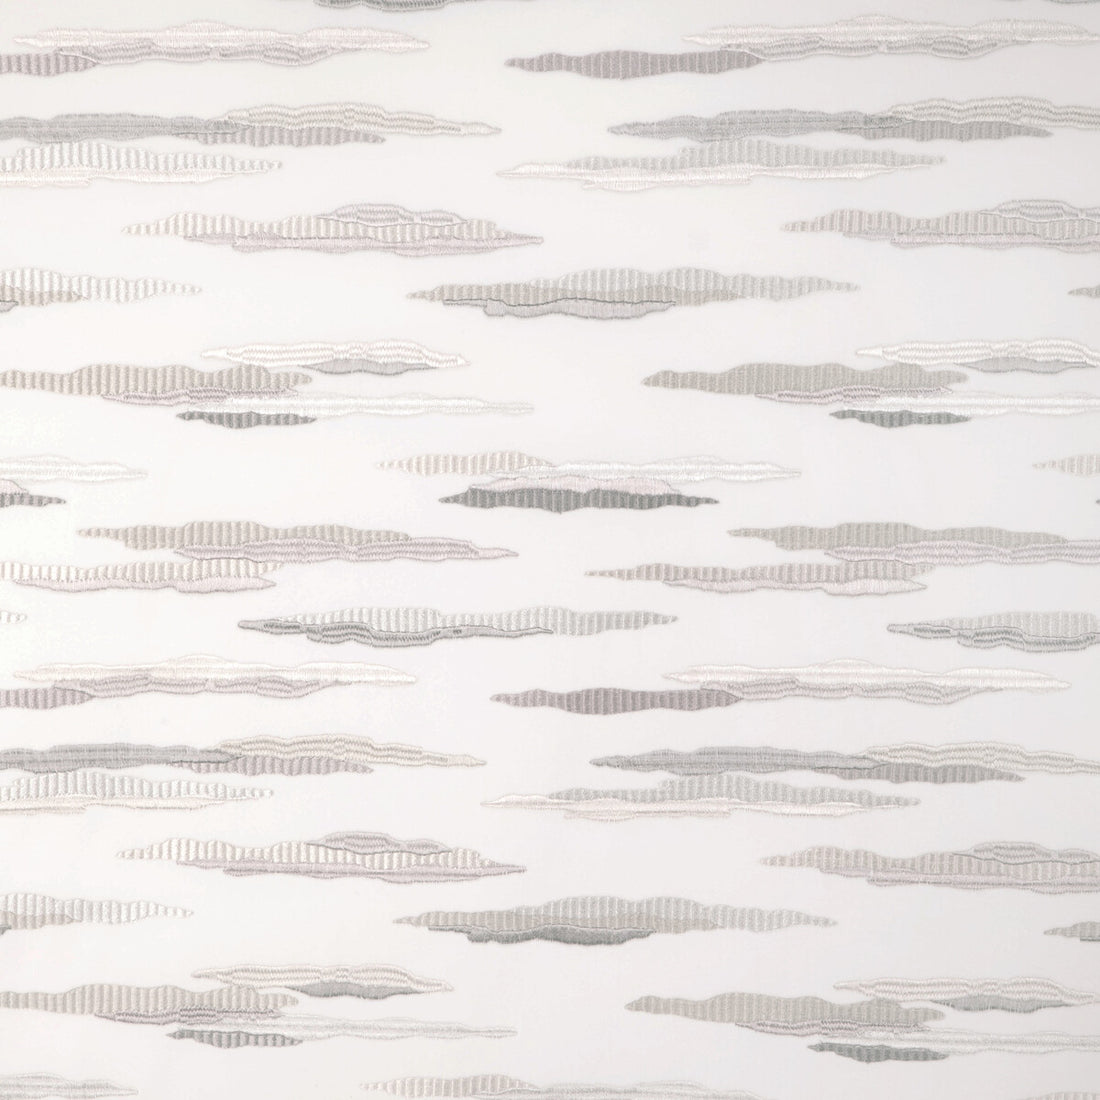 Constant Motion fabric in vapor color - pattern 36819.1110.0 - by Kravet Design in the Candice Olson collection